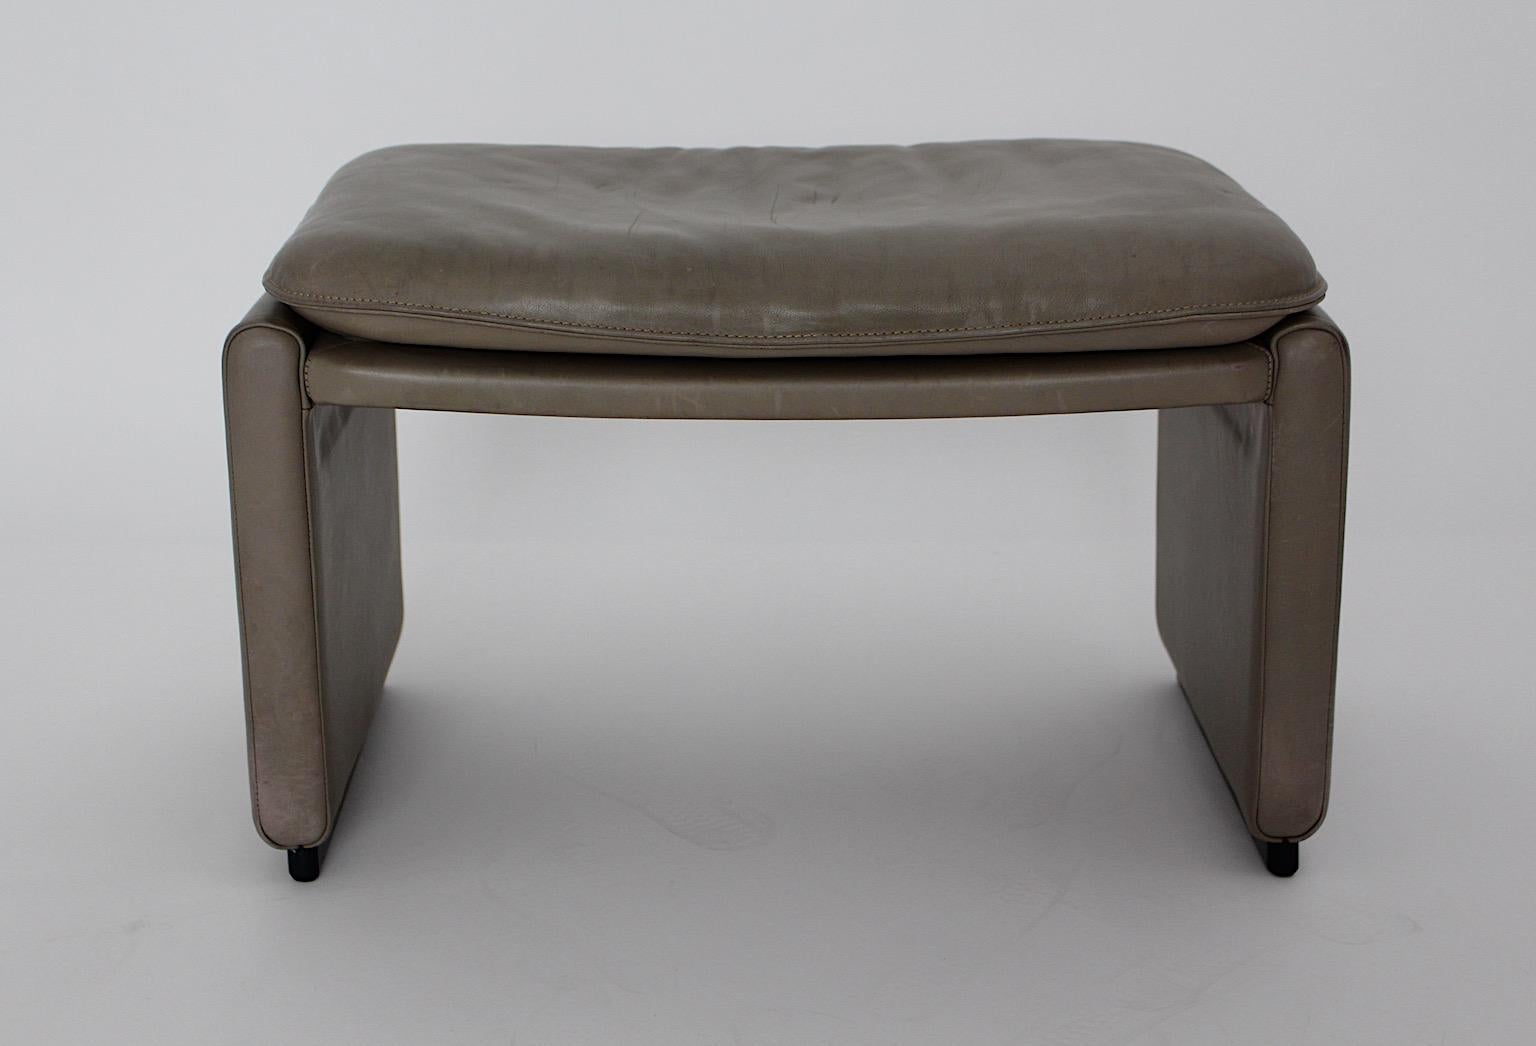 Modern Grey Leather De Sede Footstool or Stool 1980s Switzerland In Good Condition For Sale In Vienna, AT